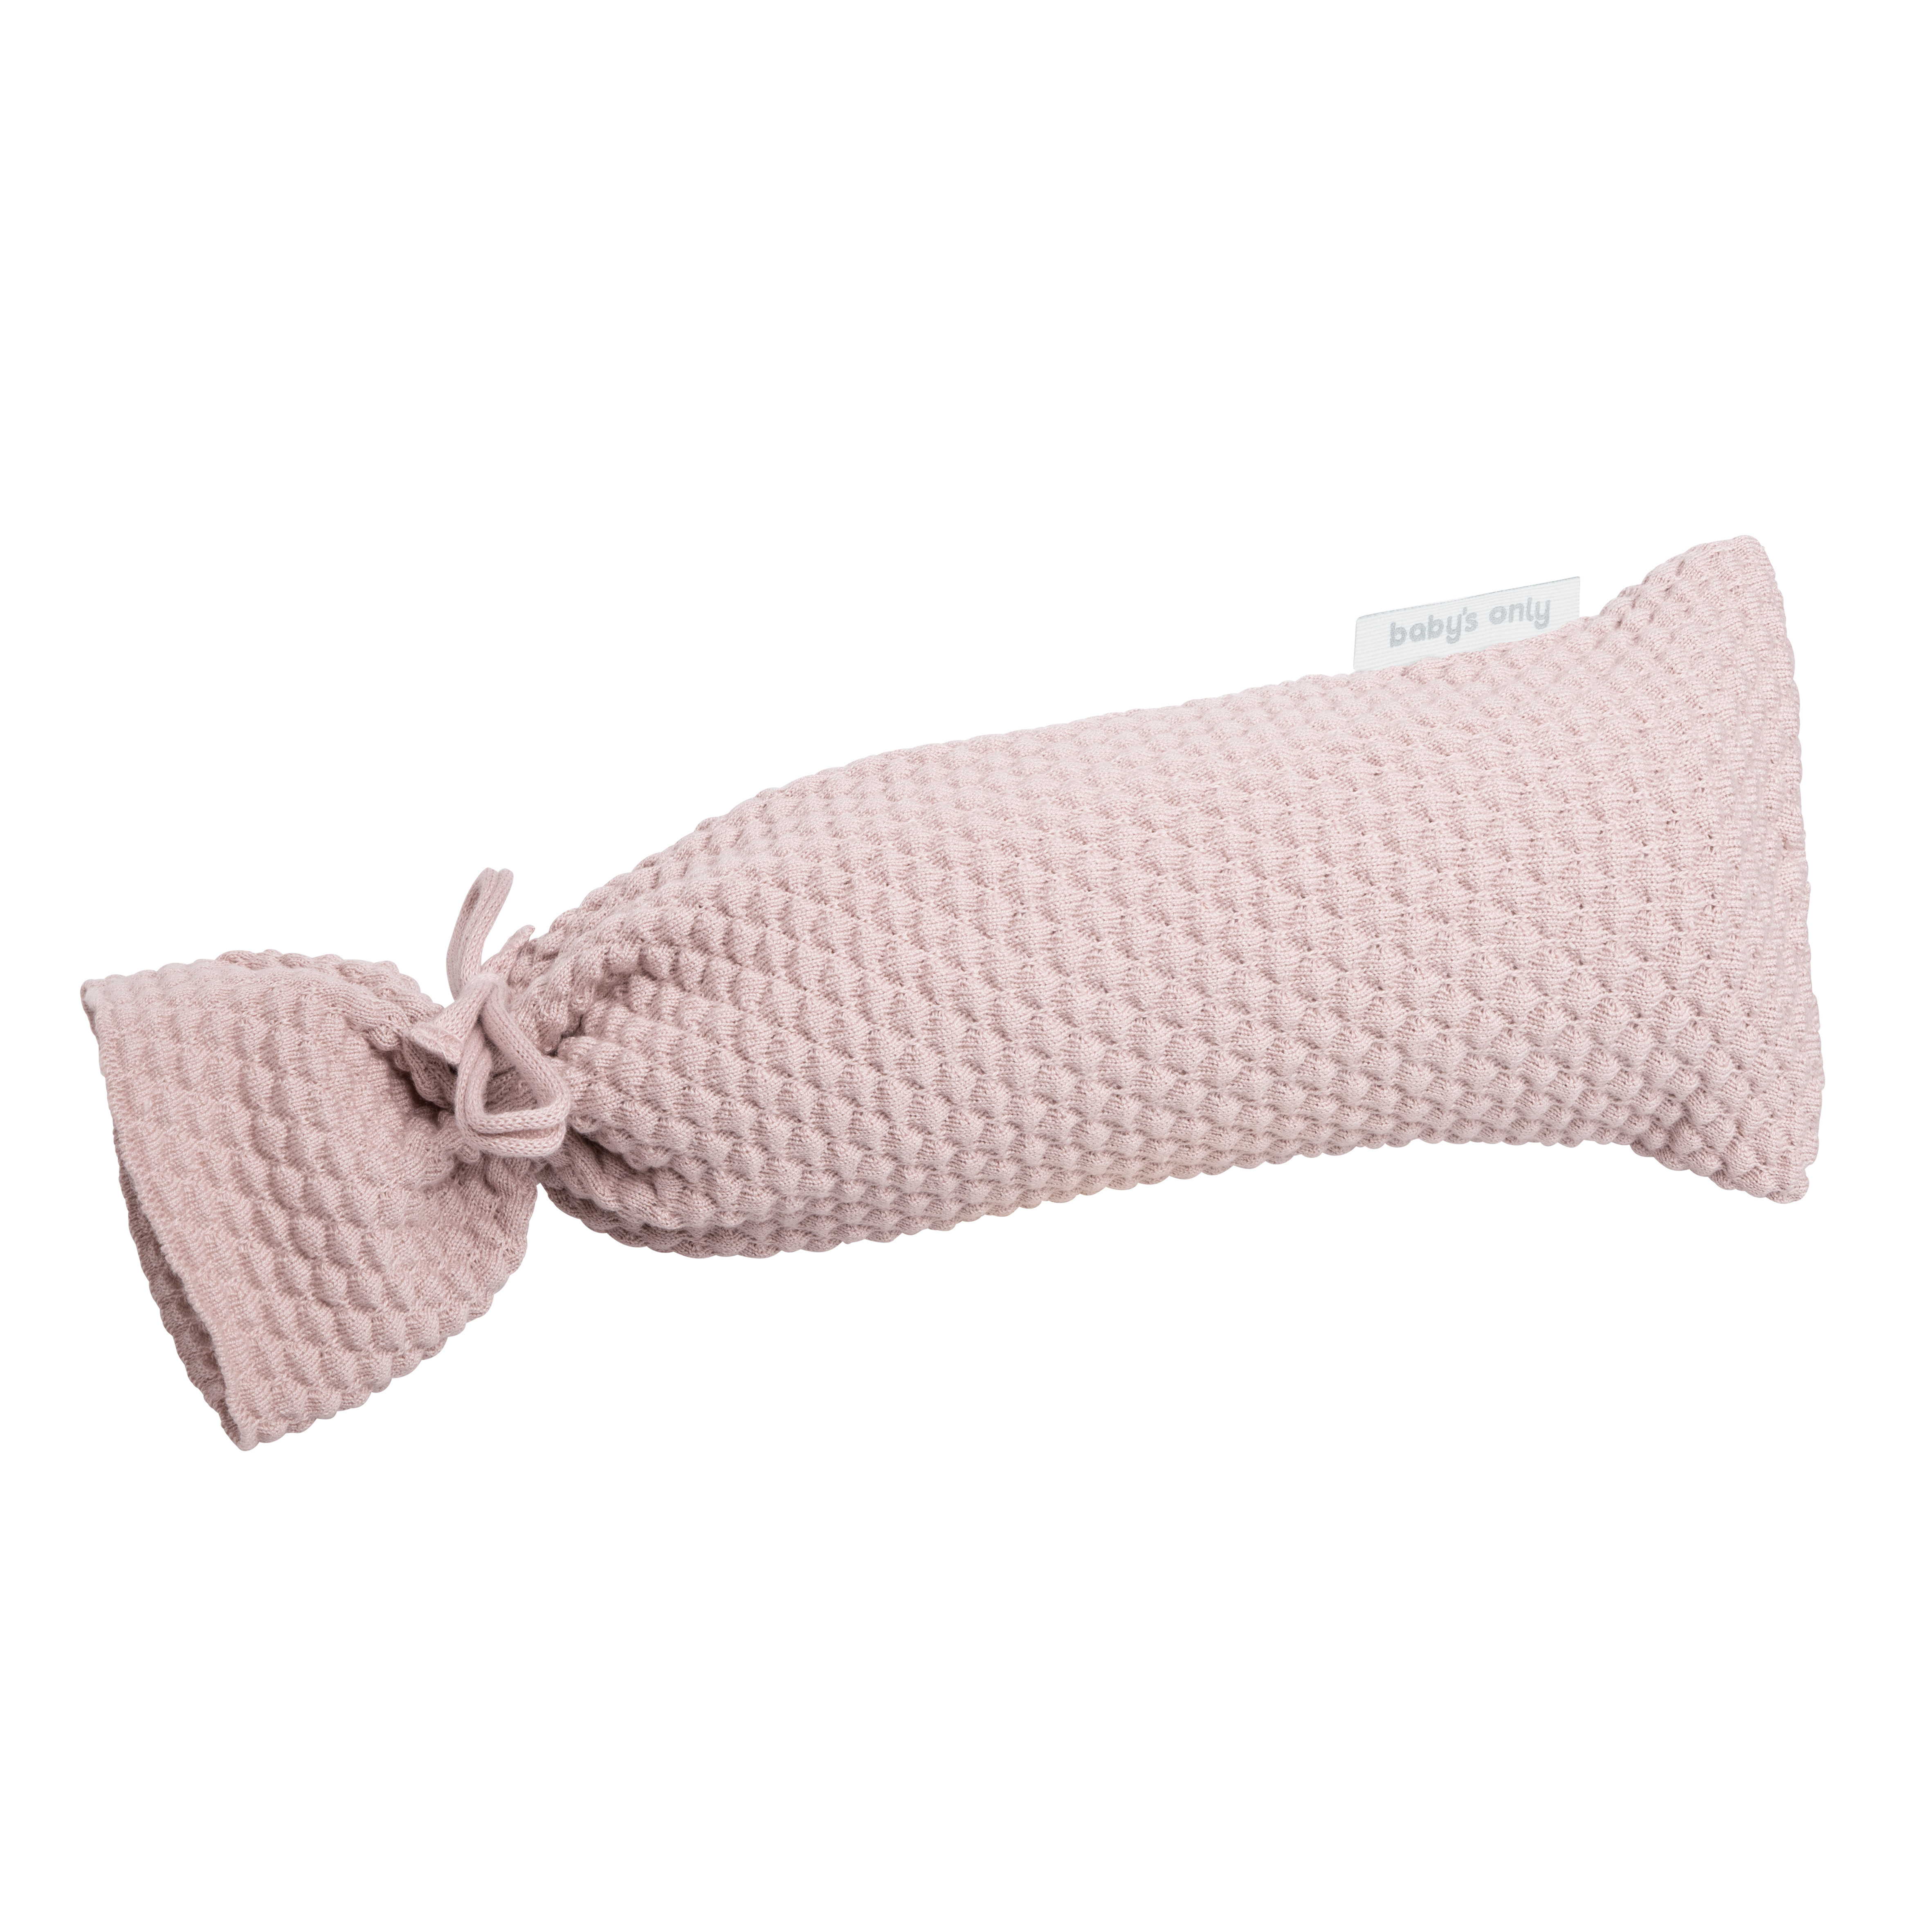 Hot water bottle cover Sky old pink